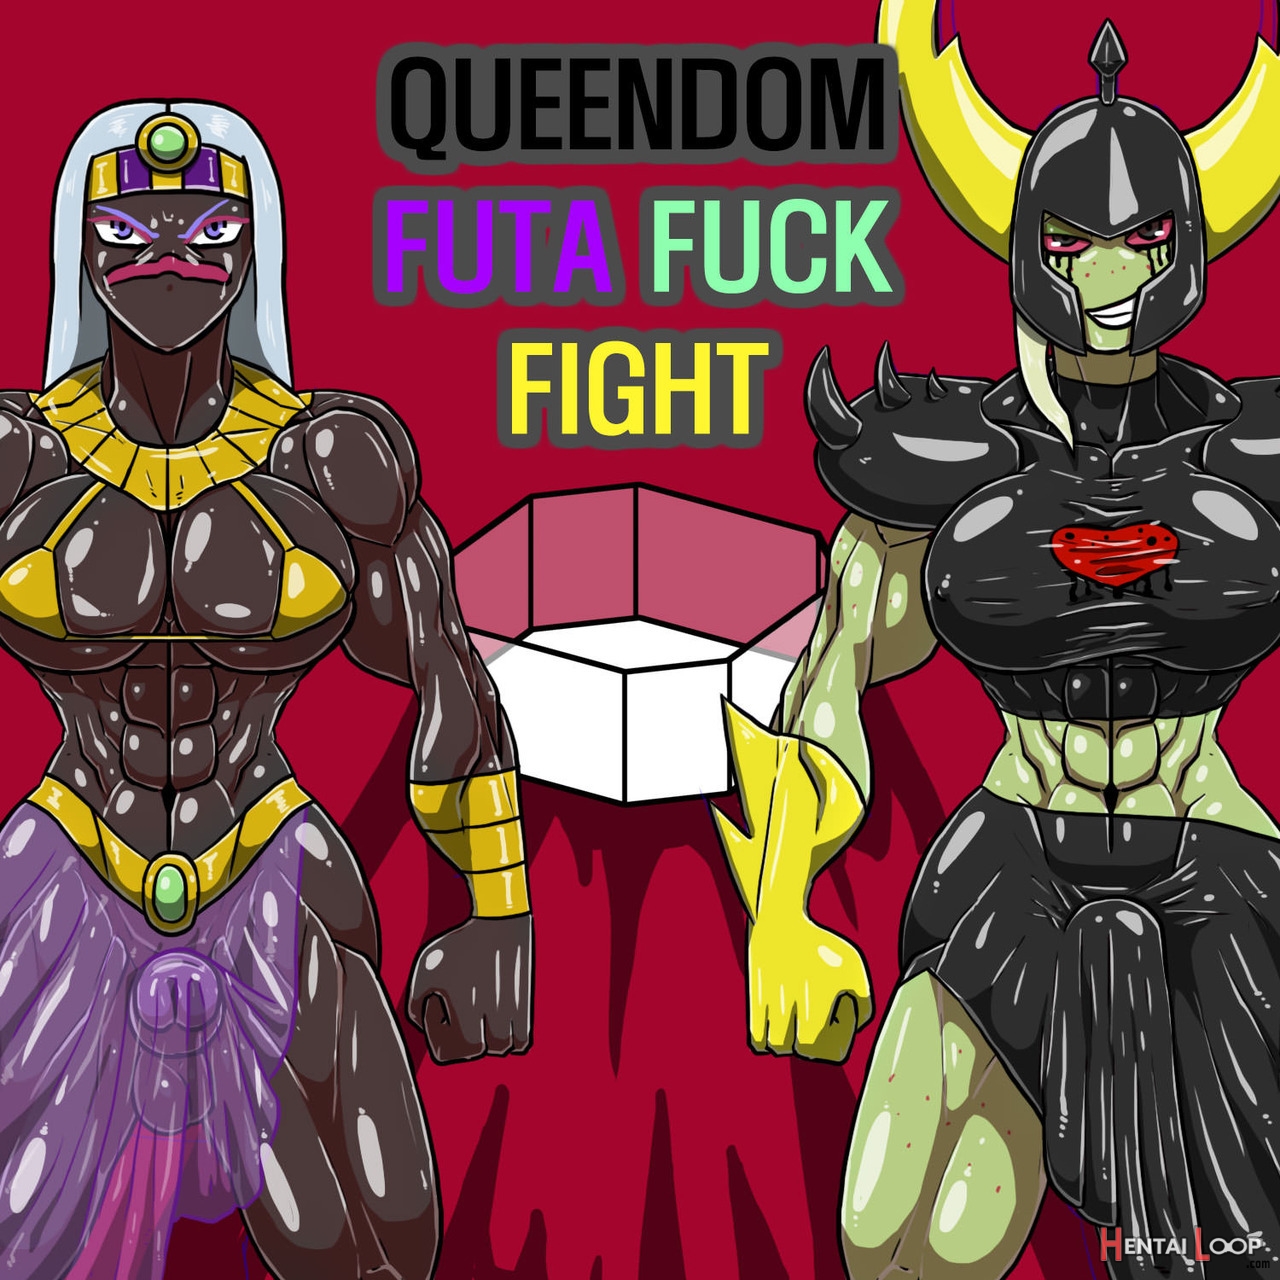 Queendom Futa Fuck Fight (by Allesey) - Hentai doujinshi for free at  HentaiLoop